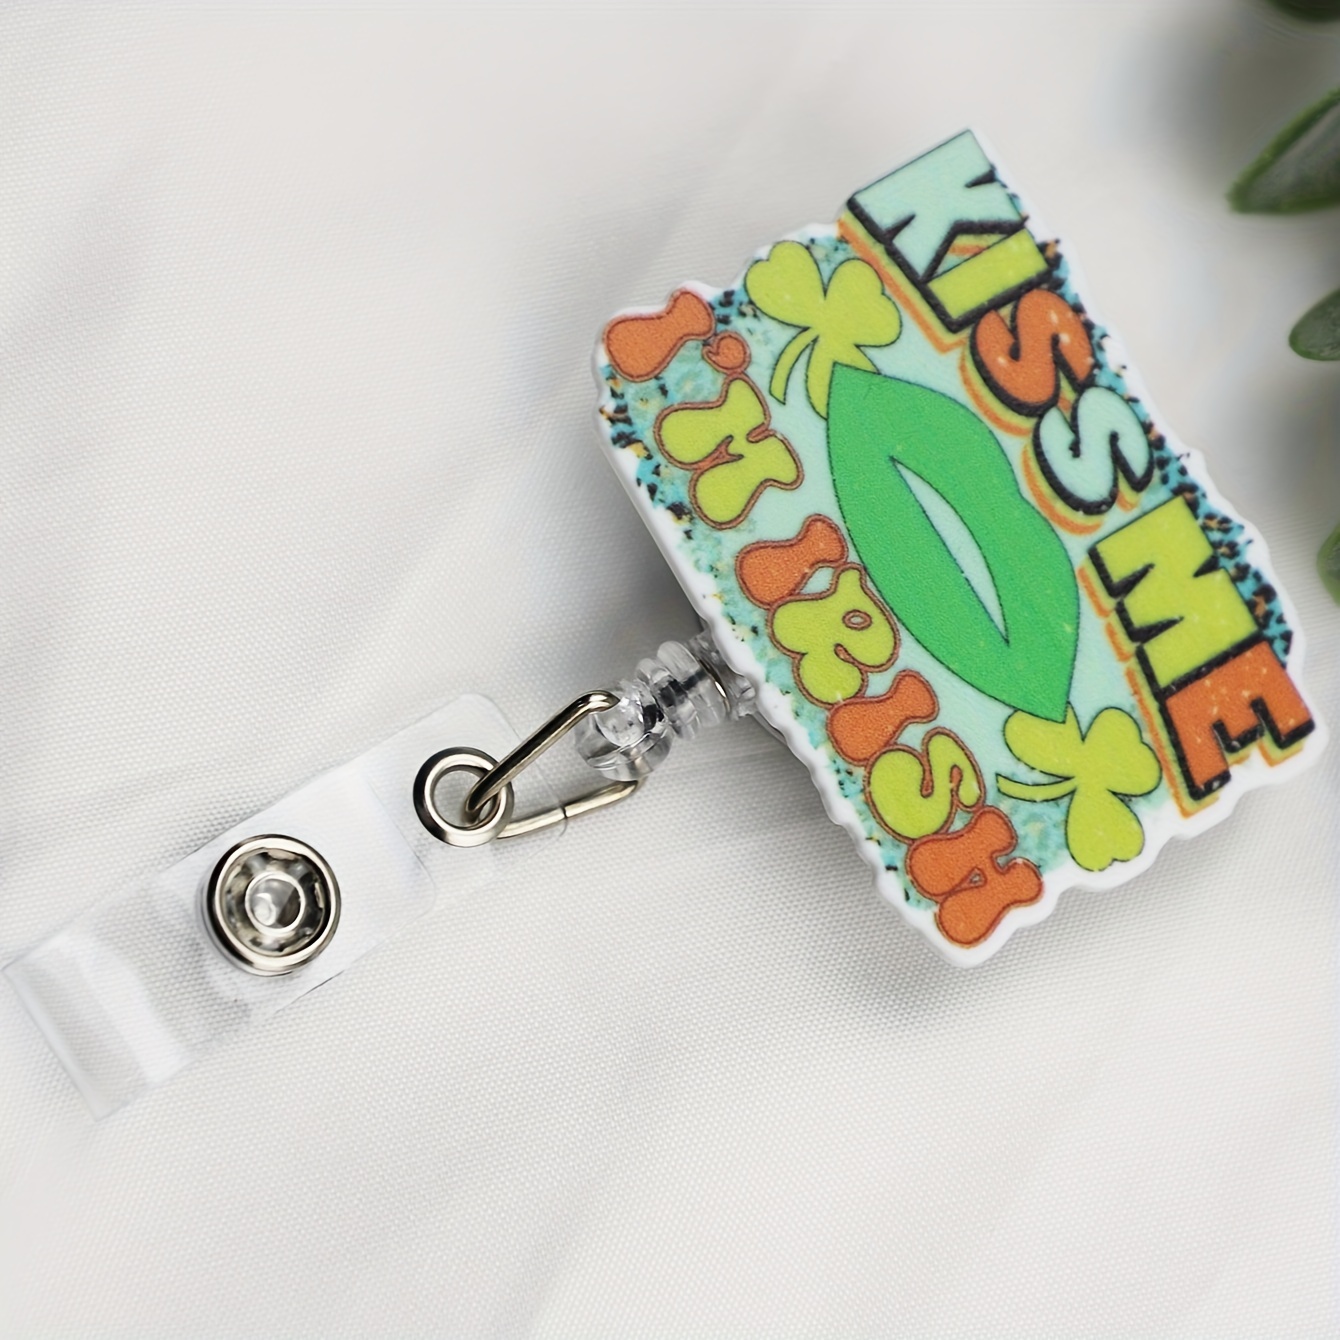 St,Flower,Patrick's Day Badge Reel Shamrock Clover ID Badge Holder with Clip Retractable Badge Reel with Alligator Clip Funny Name Badge Holder for